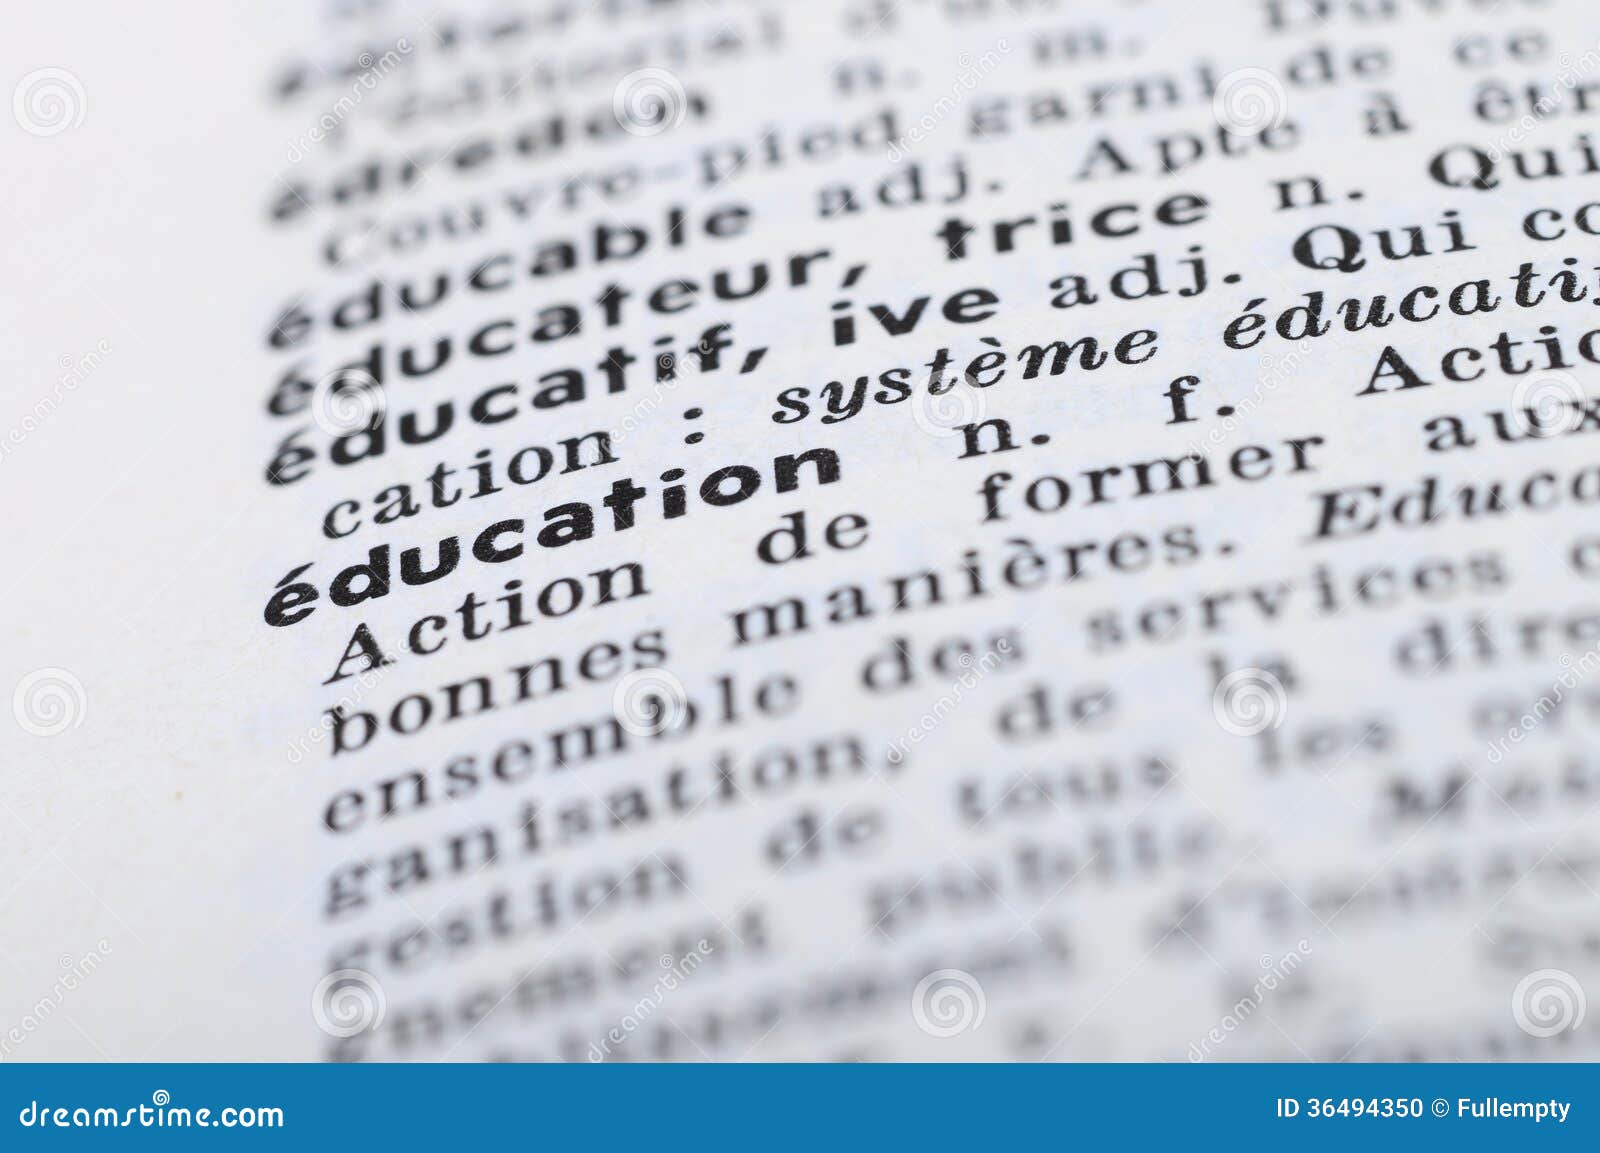 french dictionary at the word education